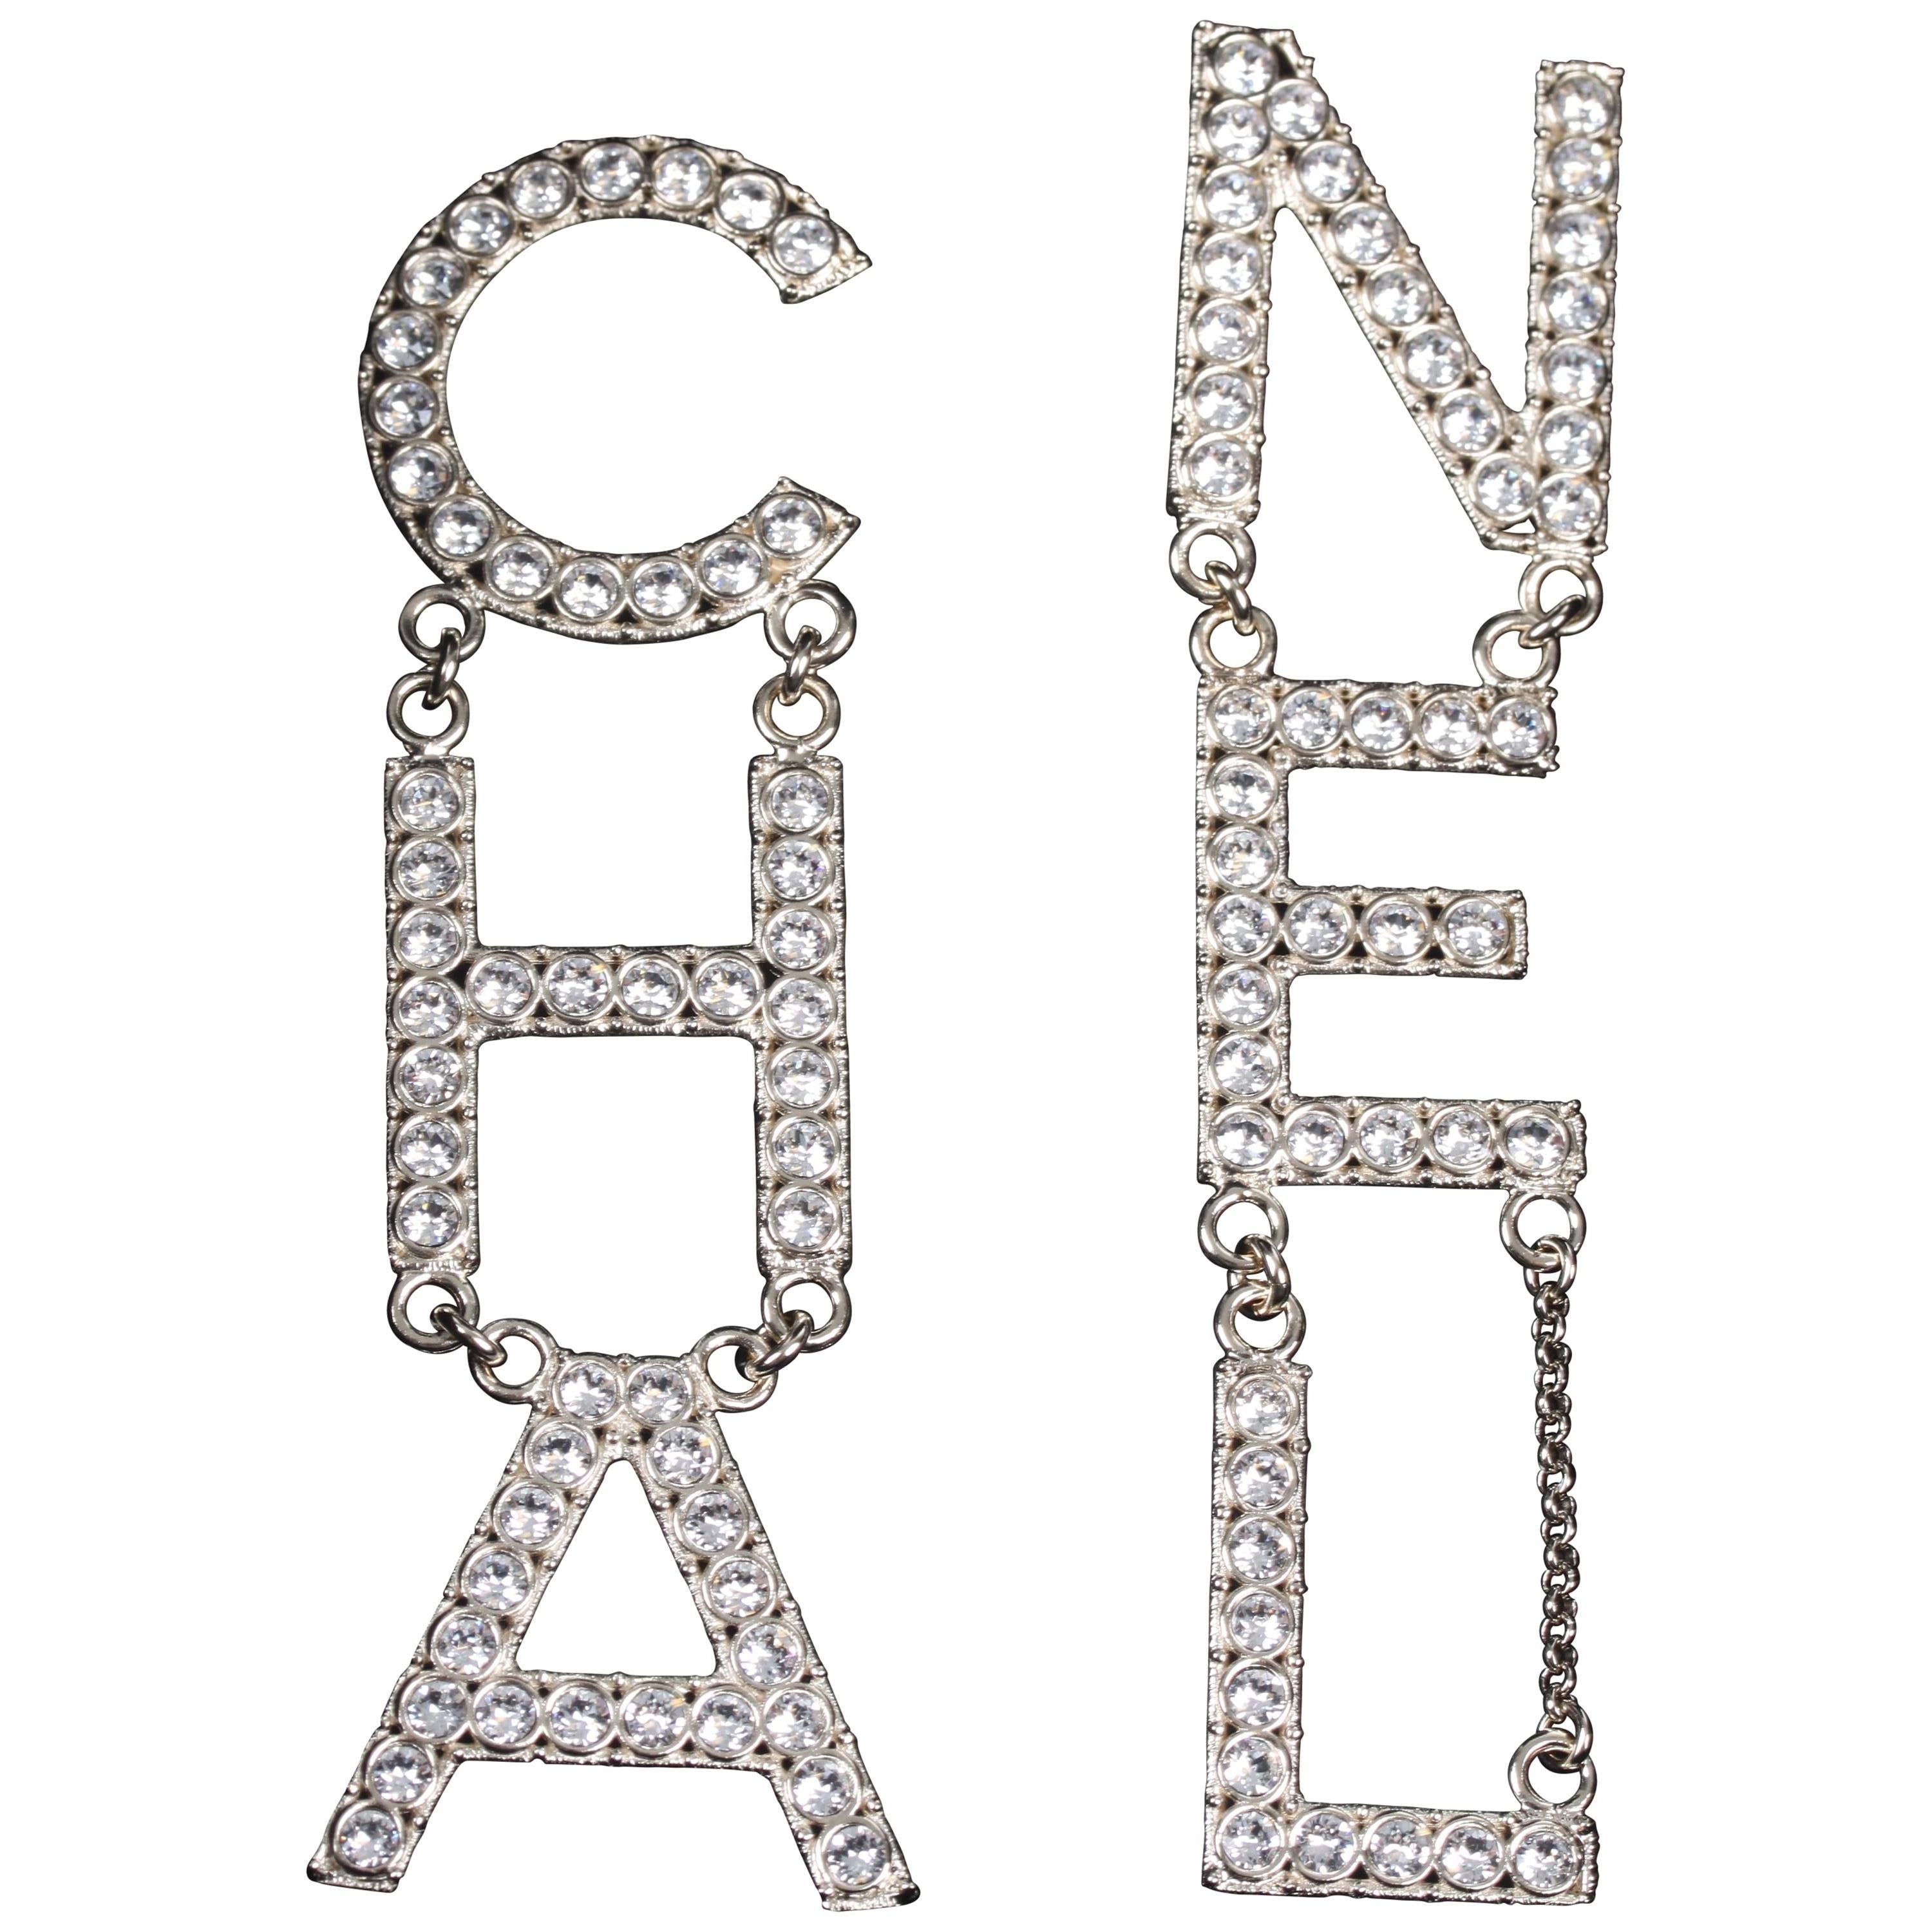 Chanel Earrings Cha Nel - For Sale on 1stDibs  cha nel chanel earrings,  cha nel earrings, chanel earrings cha and nel